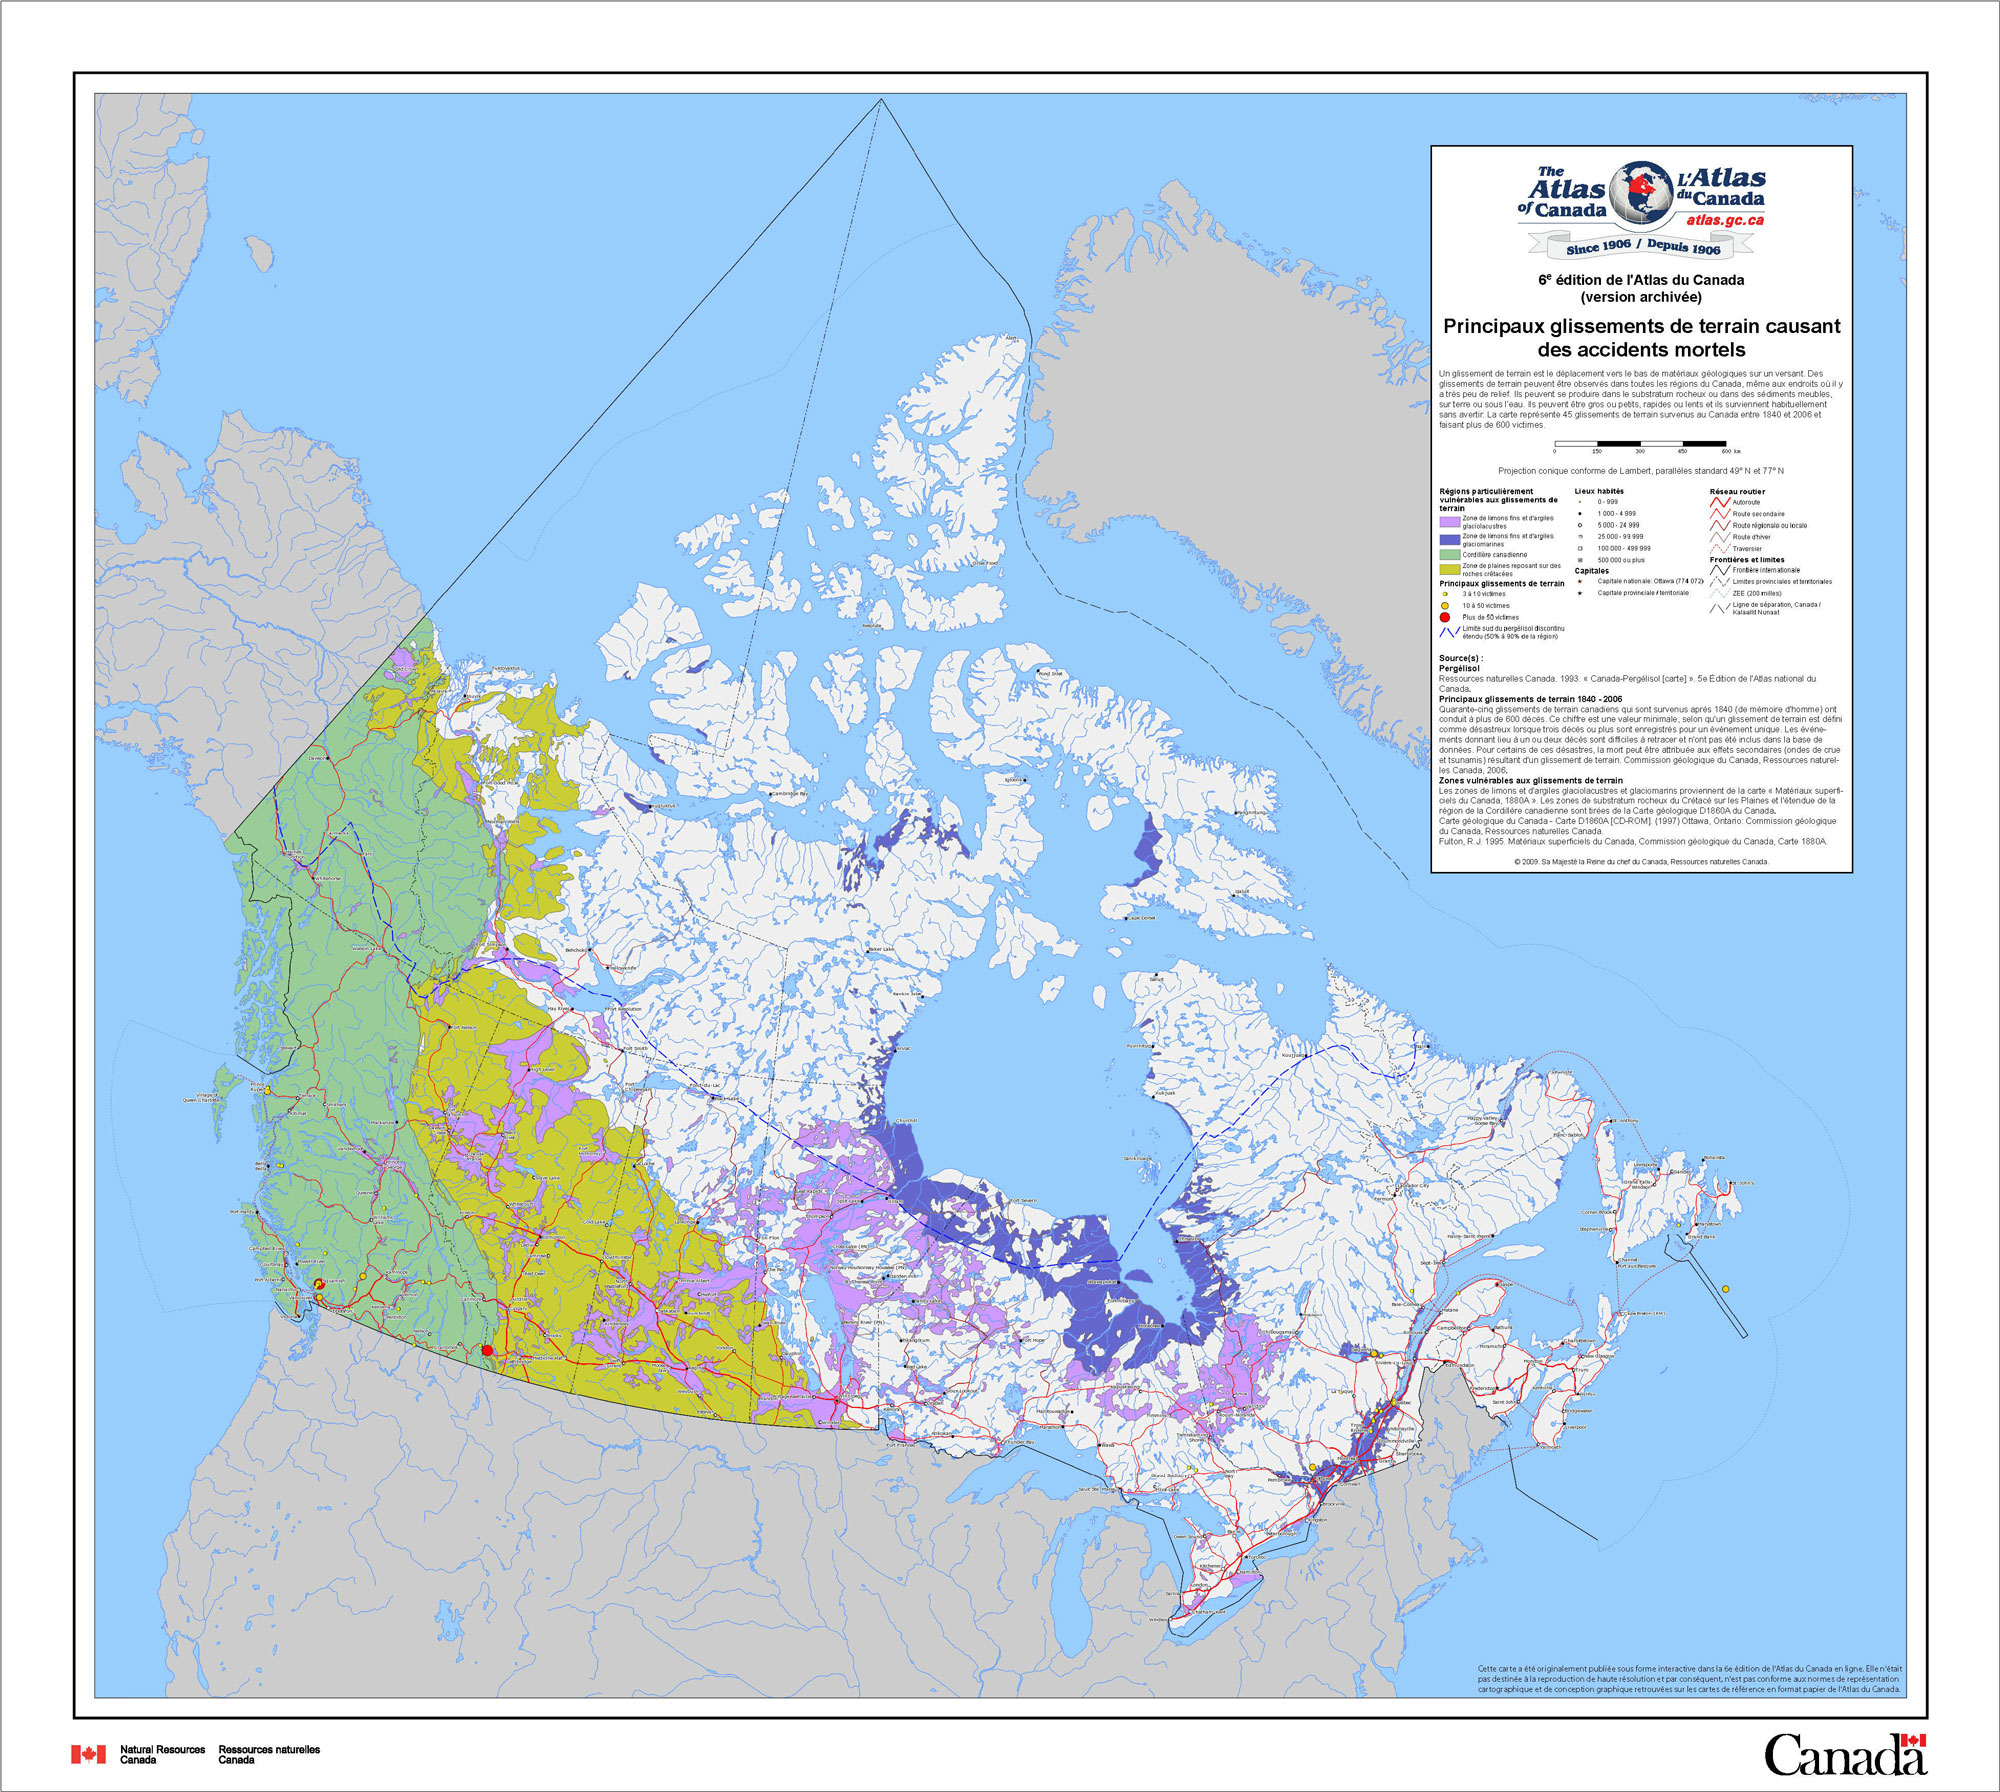 Geological map of Canada that represents 45 landslides which occurred between 1840 and 2006